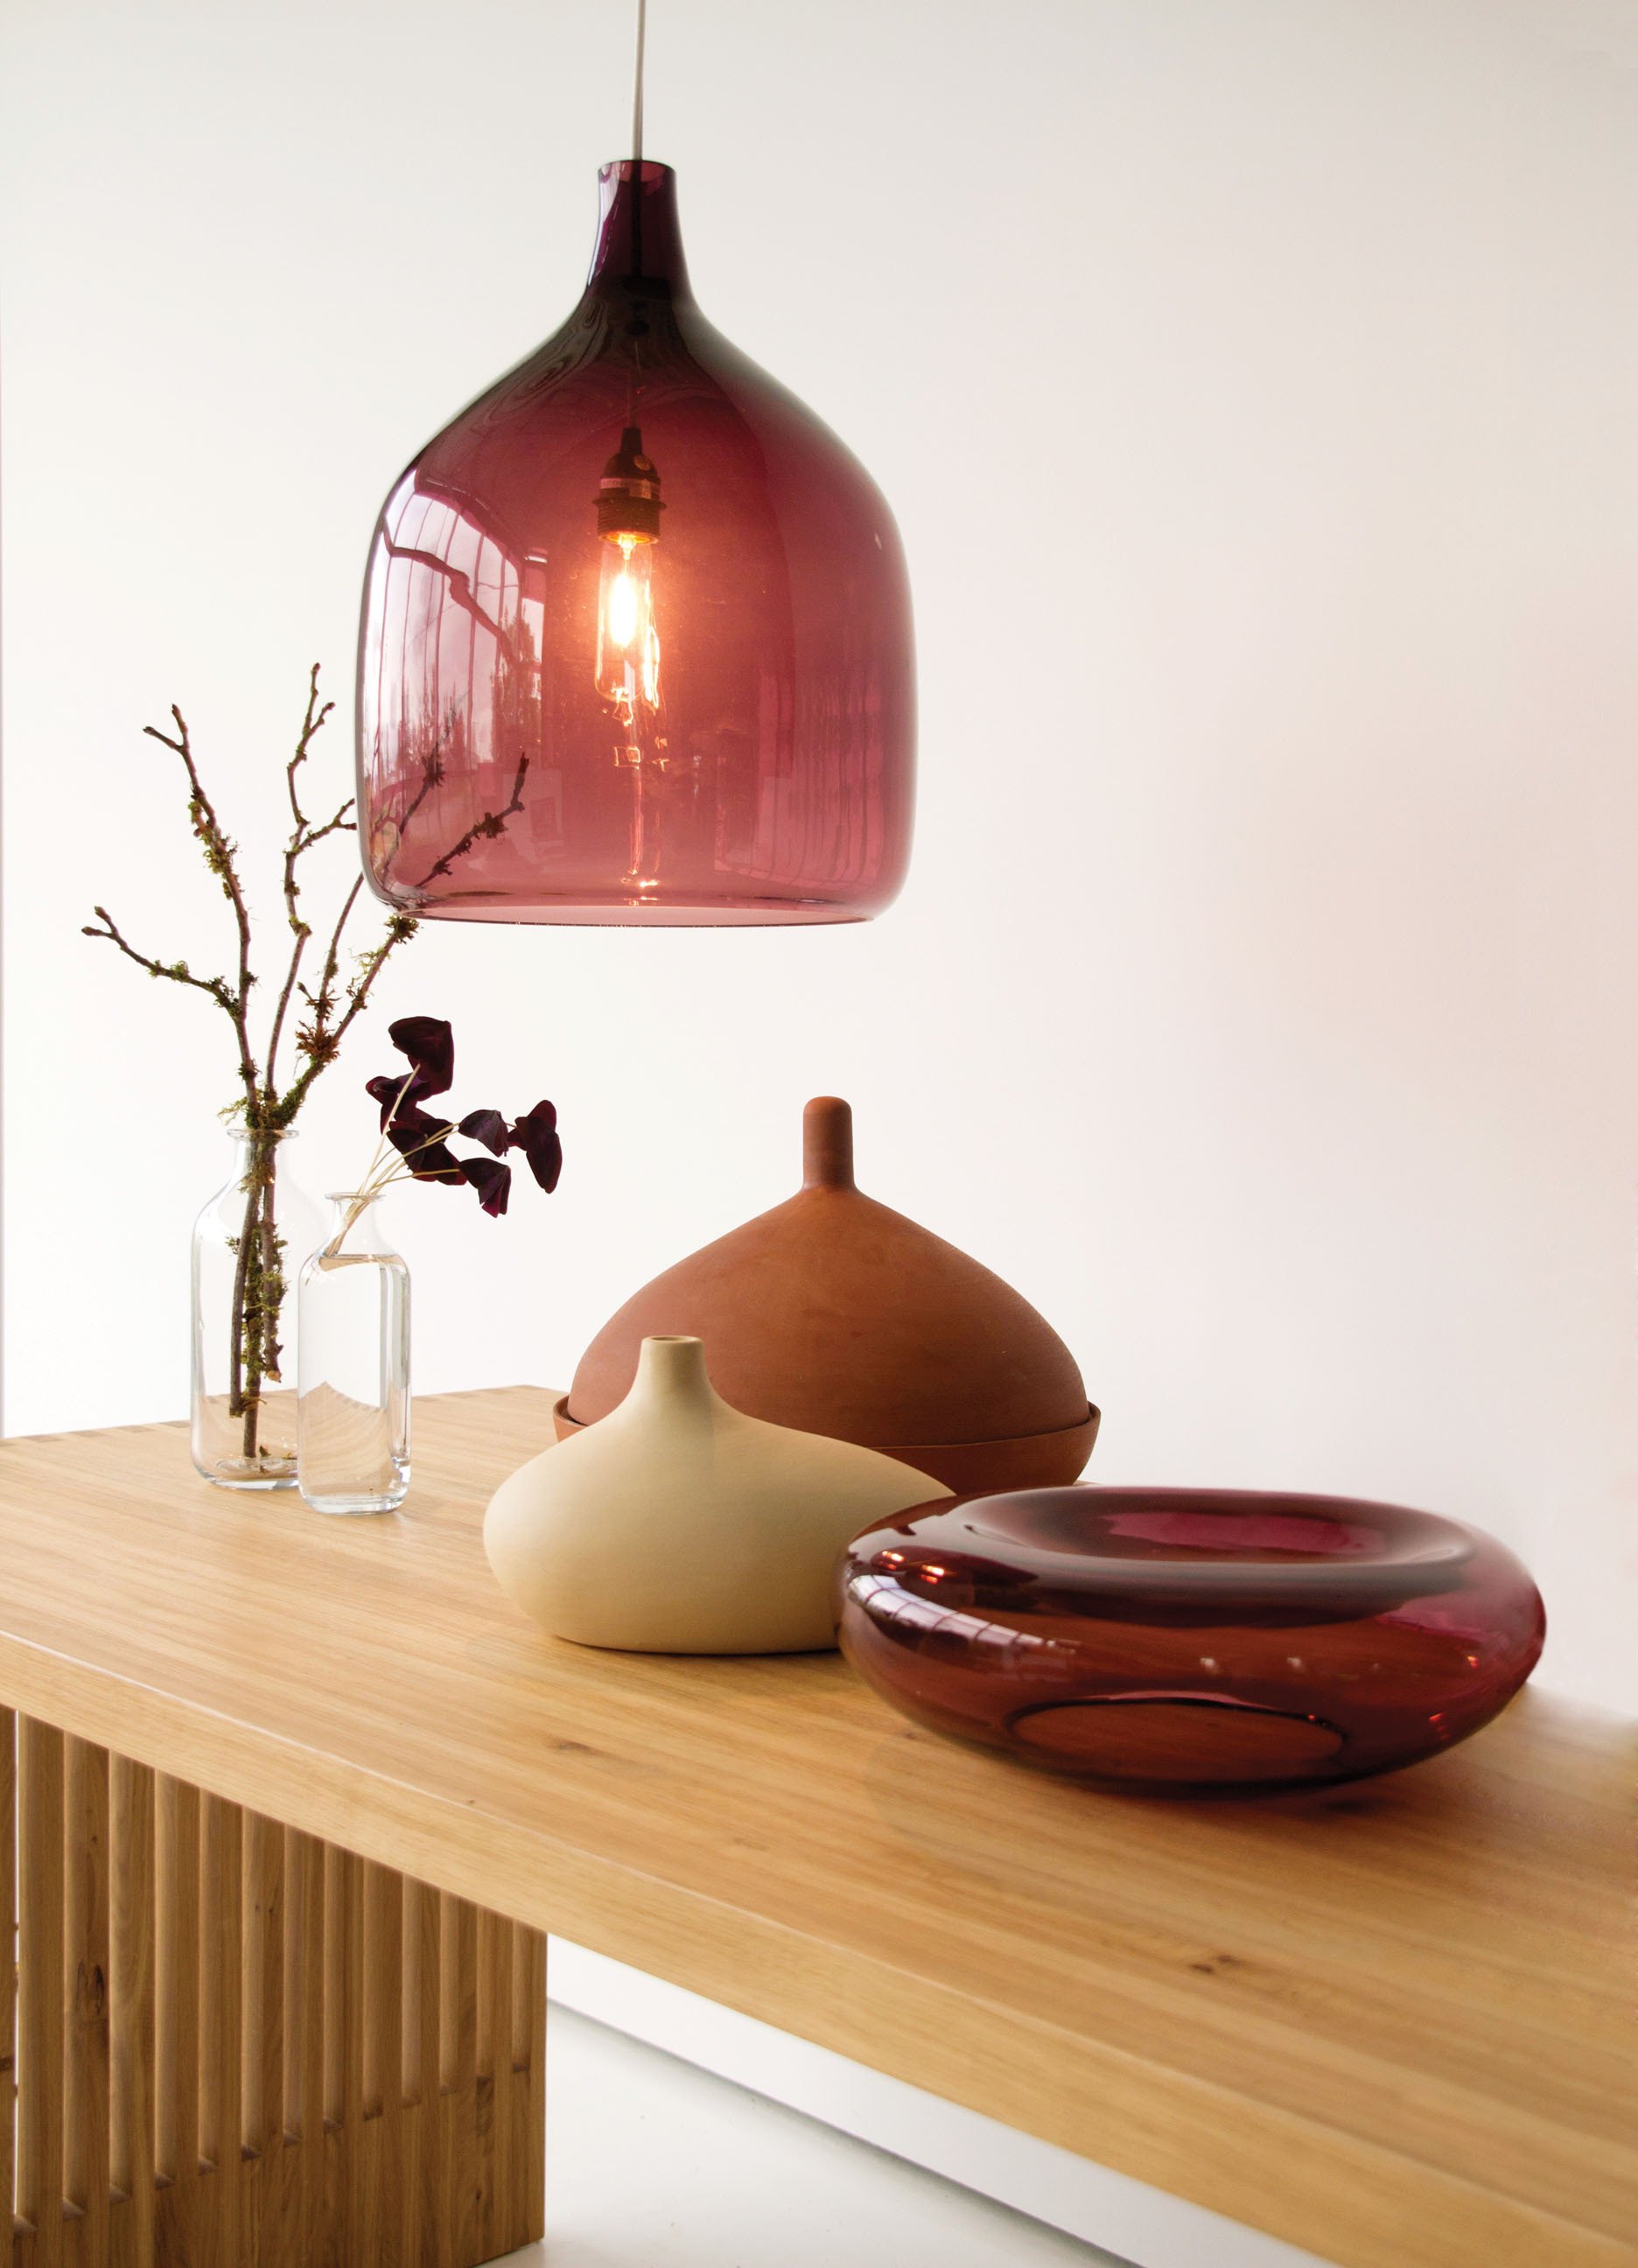 Table, beet lamp, vases, warm browns, autumn colours